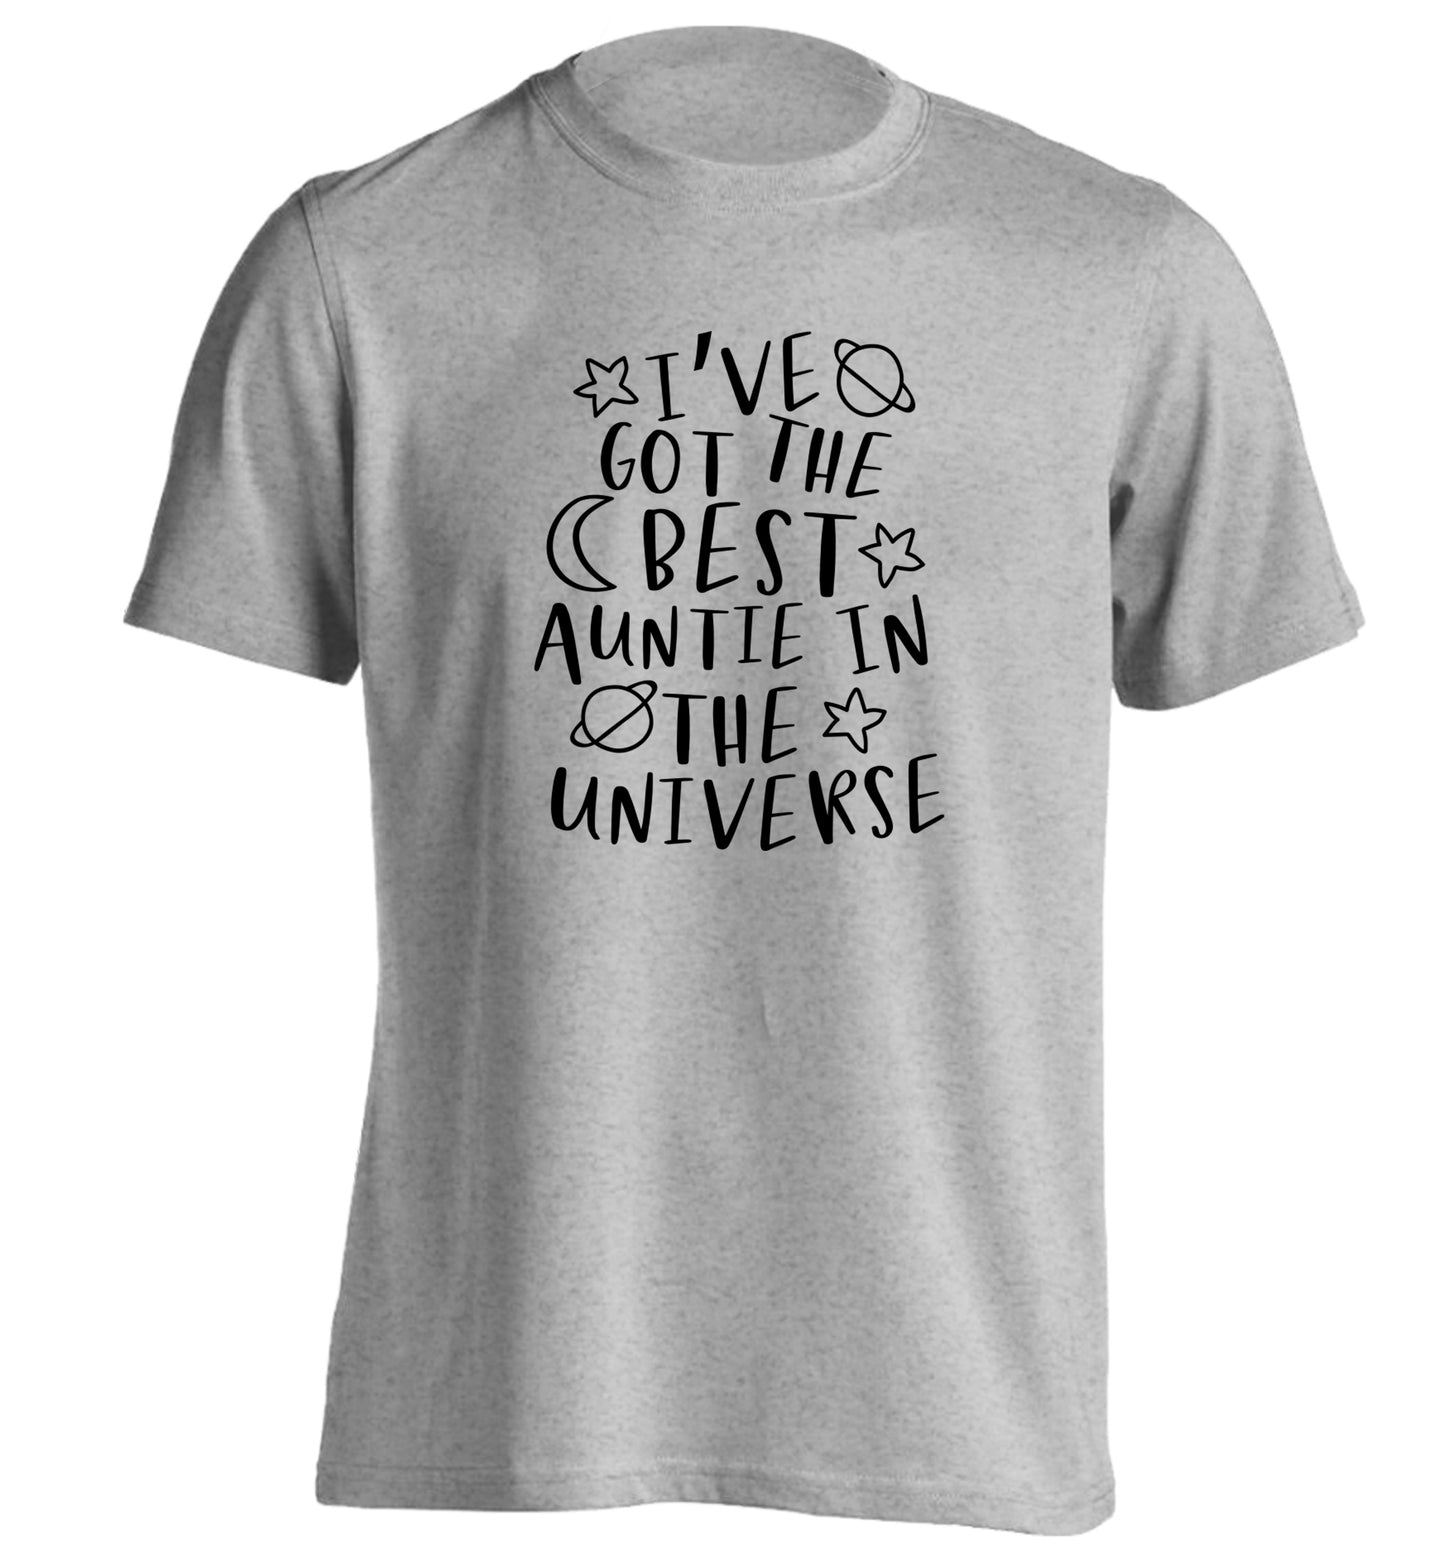 I've got the best auntie in the universe adults unisex grey Tshirt 2XL